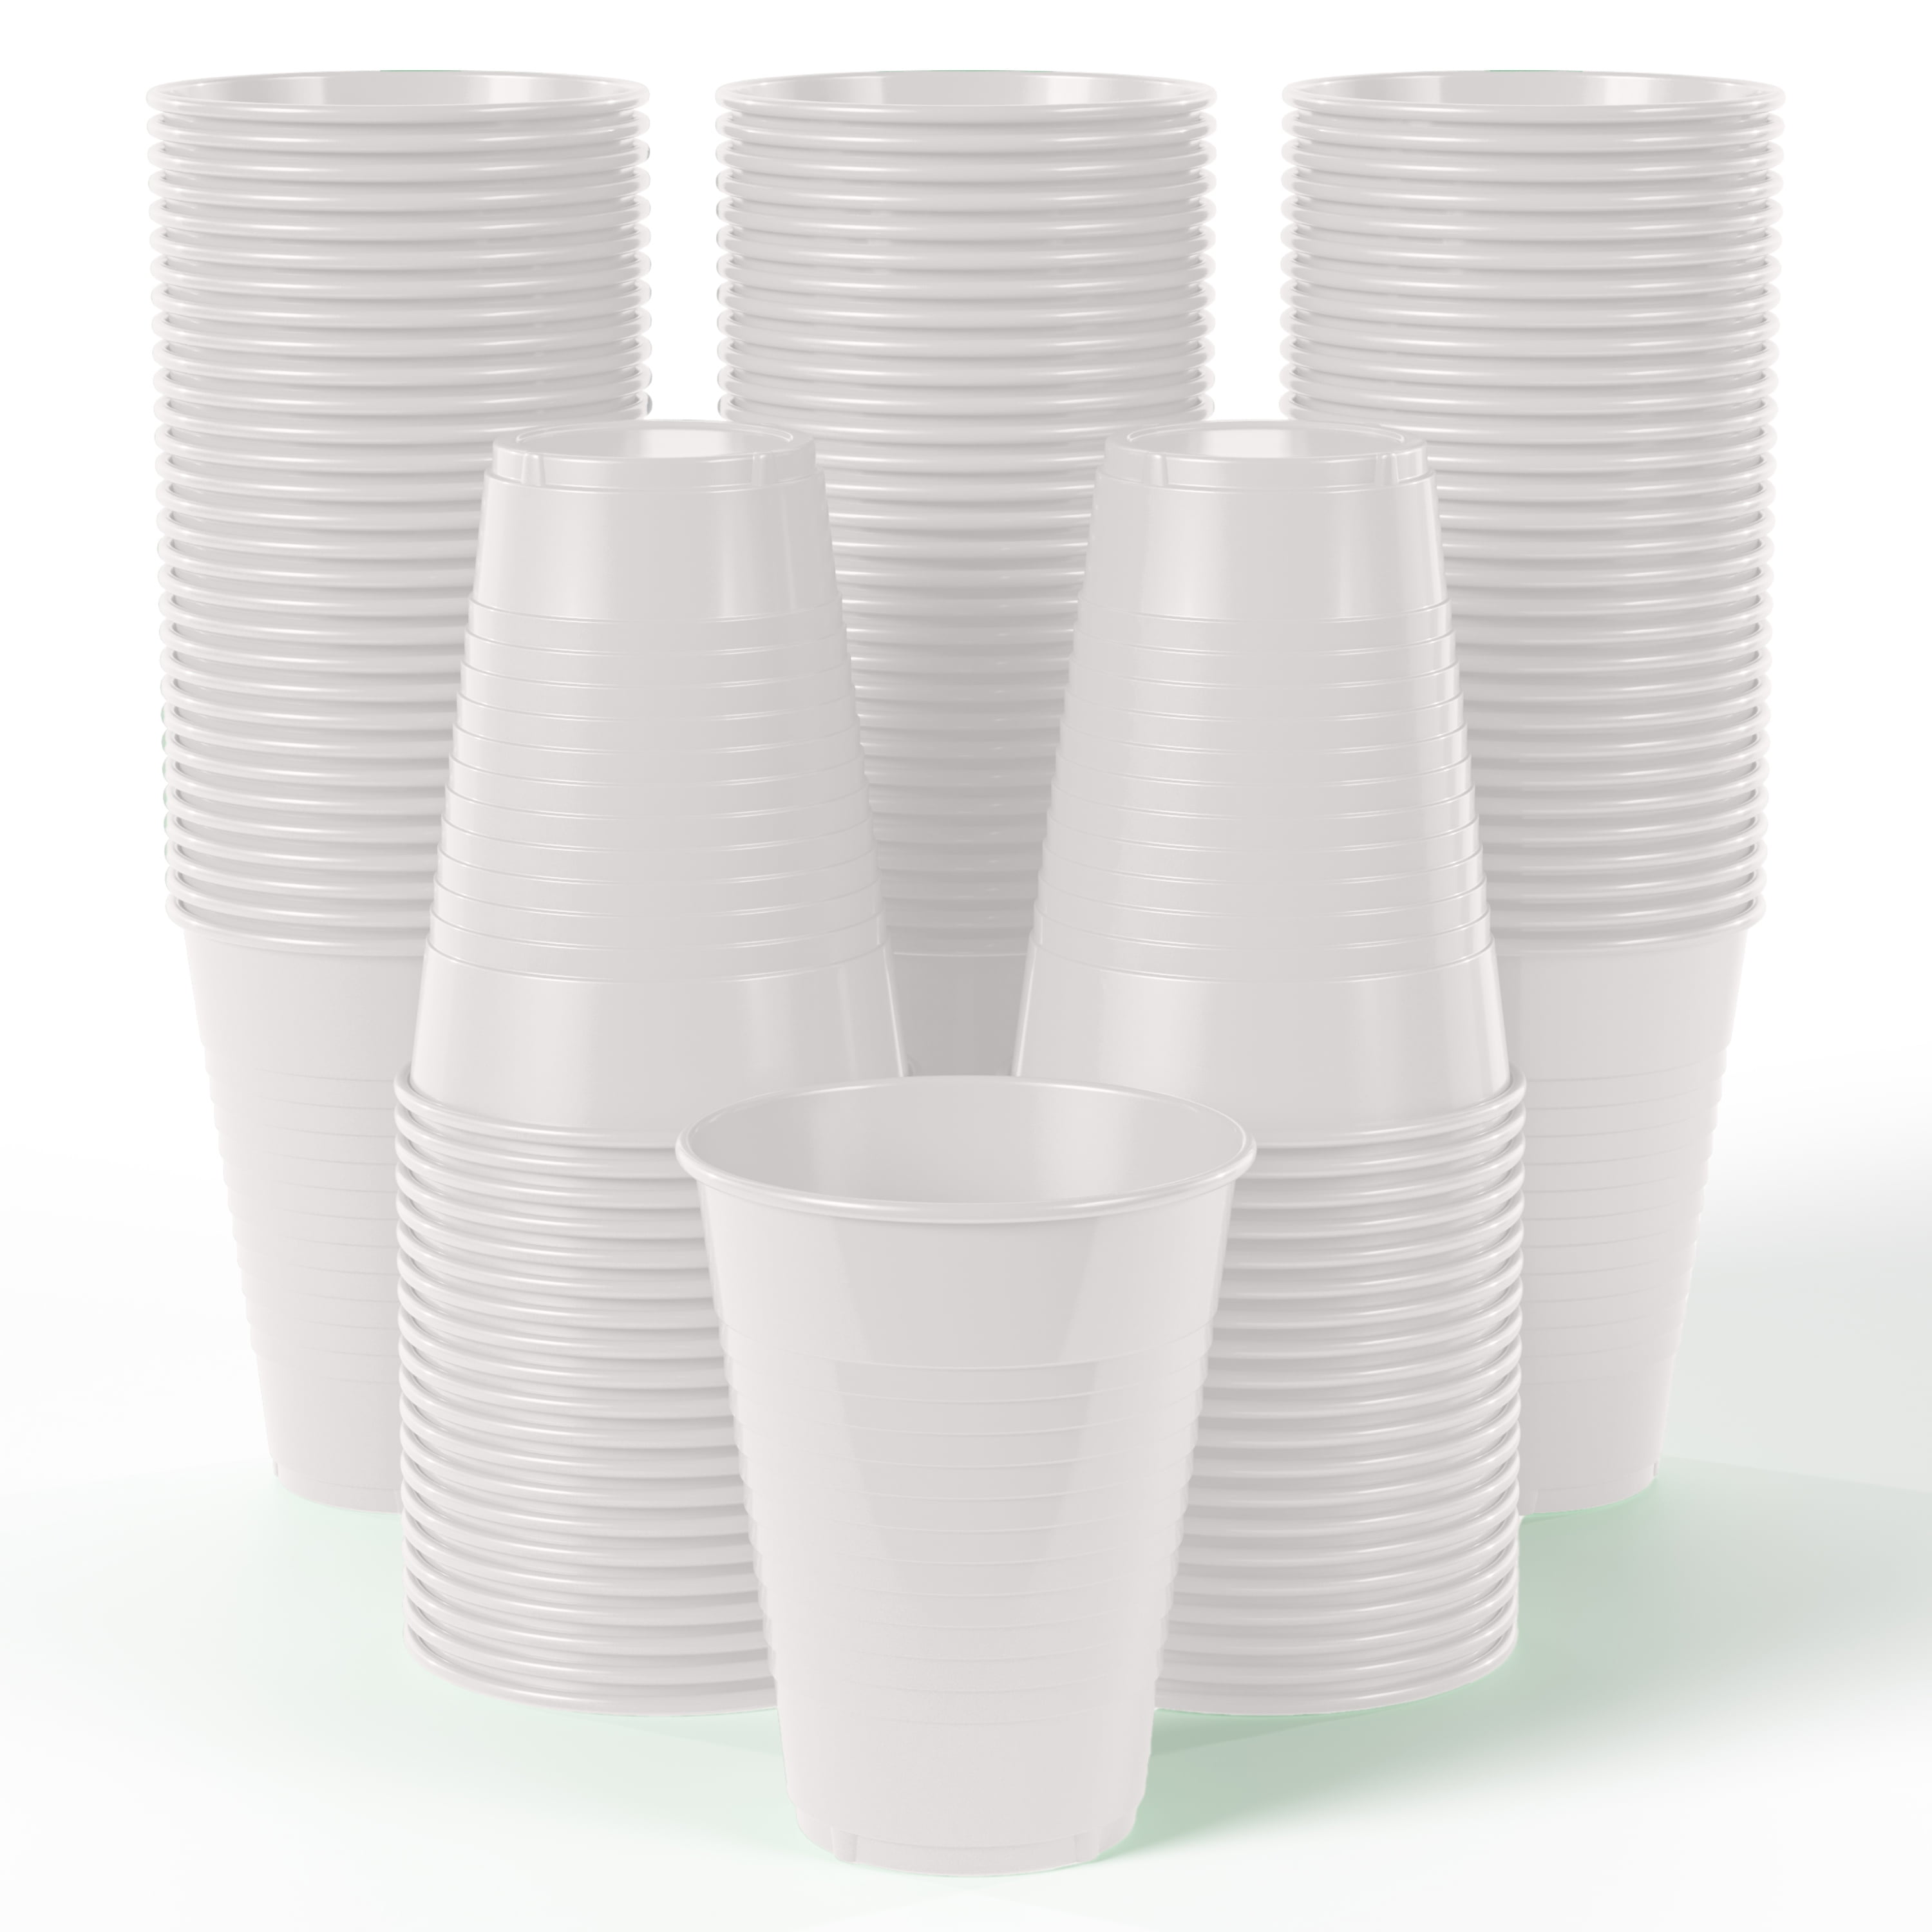 Emerald Green Solid Paper Cups - 12 oz (Pack Of 10) - Disposable Drinkware  - Perfect For Parties, Events & Gatherings